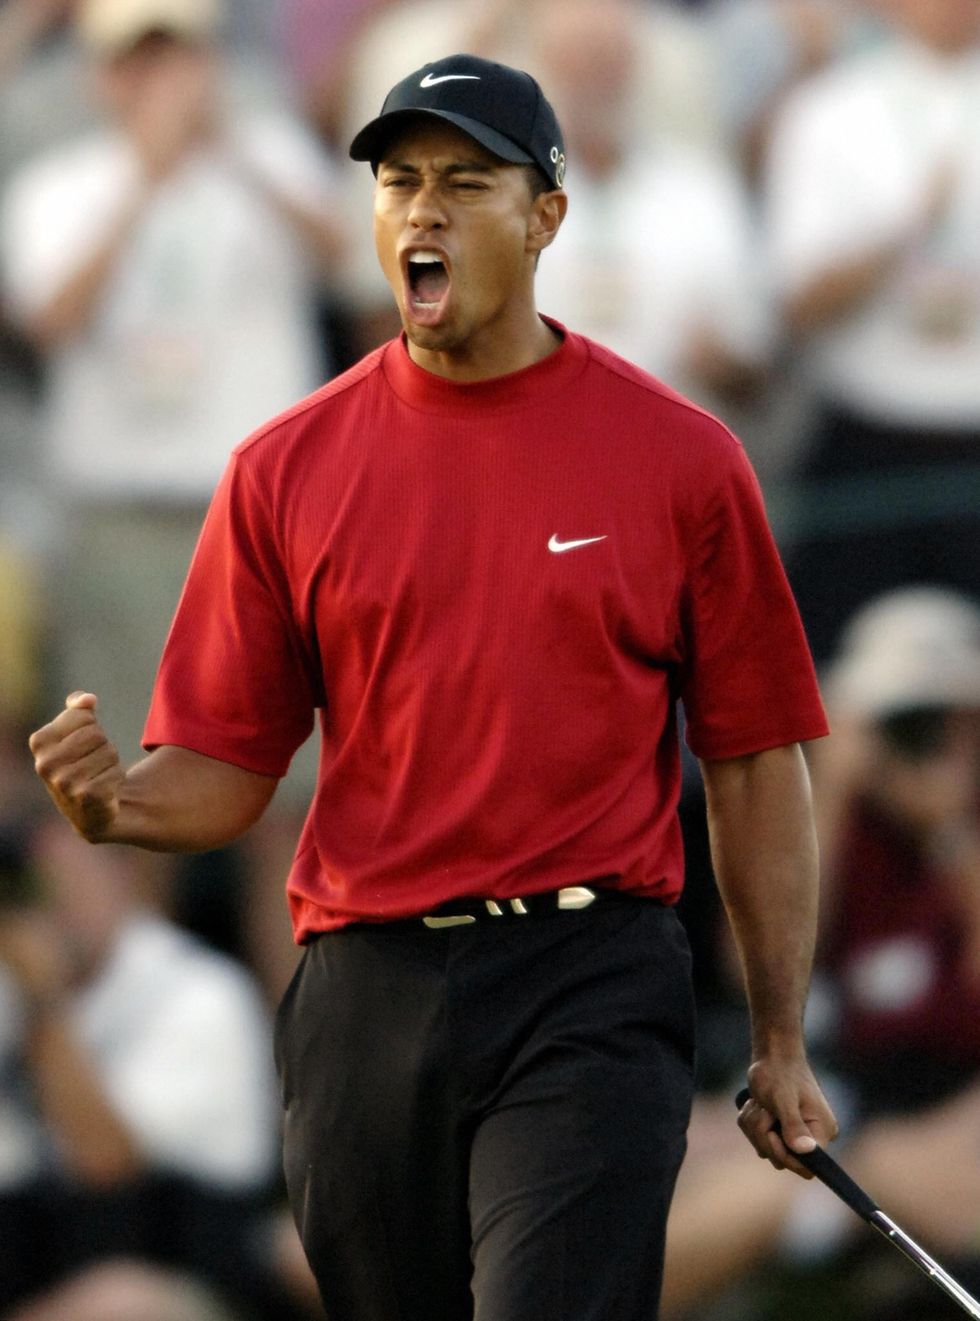 Tiger Woods was famous for playing mind games with his rivals